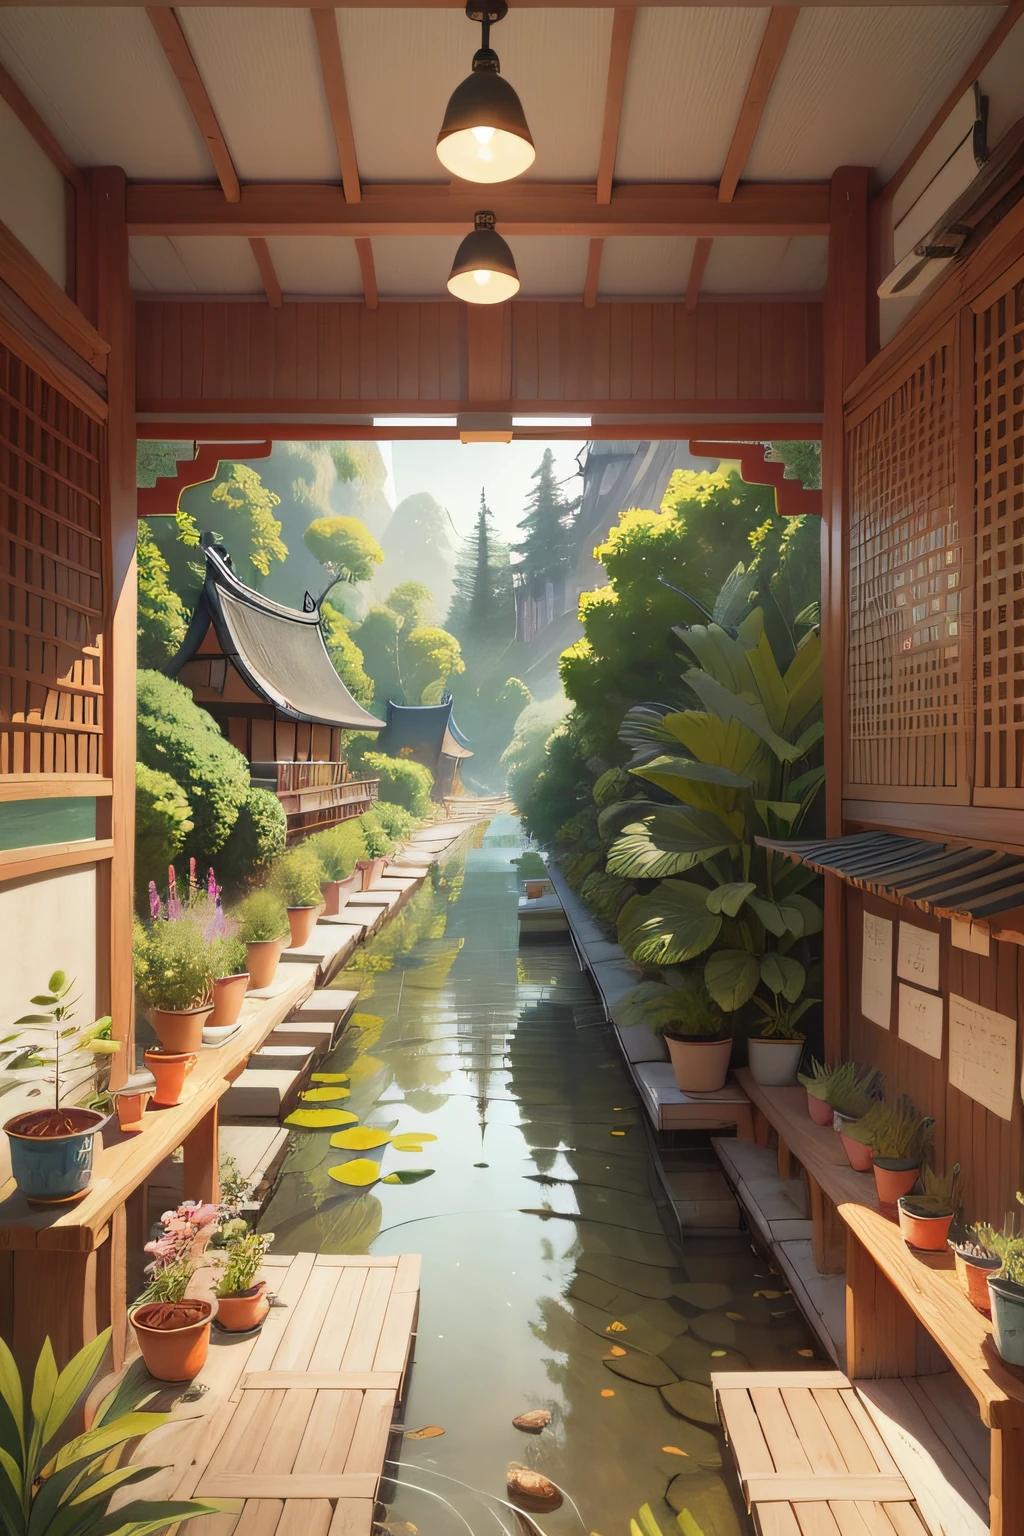 Rice is grown in water, A beautiful artwork illustration, Game illustration, serene illustration, Chinese watercolor style, by Yang J, Japanese inspired poster, artwork in the style of z.Show on the. gu, author：Xia Gui, G Liulian art style, Poster illustration, author：FAN Qi, environment design illustration, illustration concept art, author：Qu Leilei